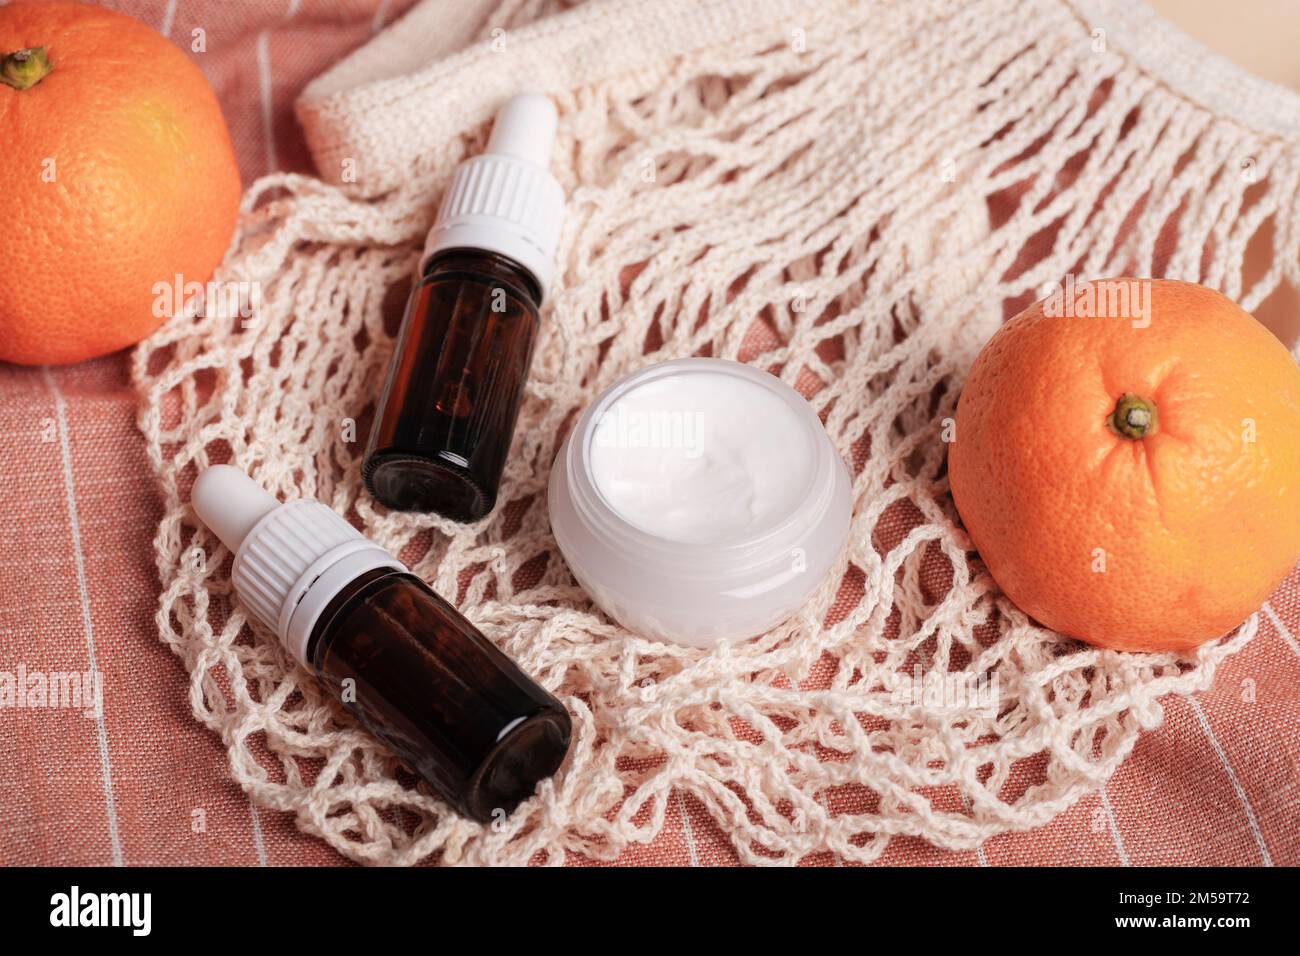 Cream jar and essential oil bottles on the background of cotton mesh bag and tangerines. Organic spa cosmetic beauty product. Zero waste concept. Stock Photo